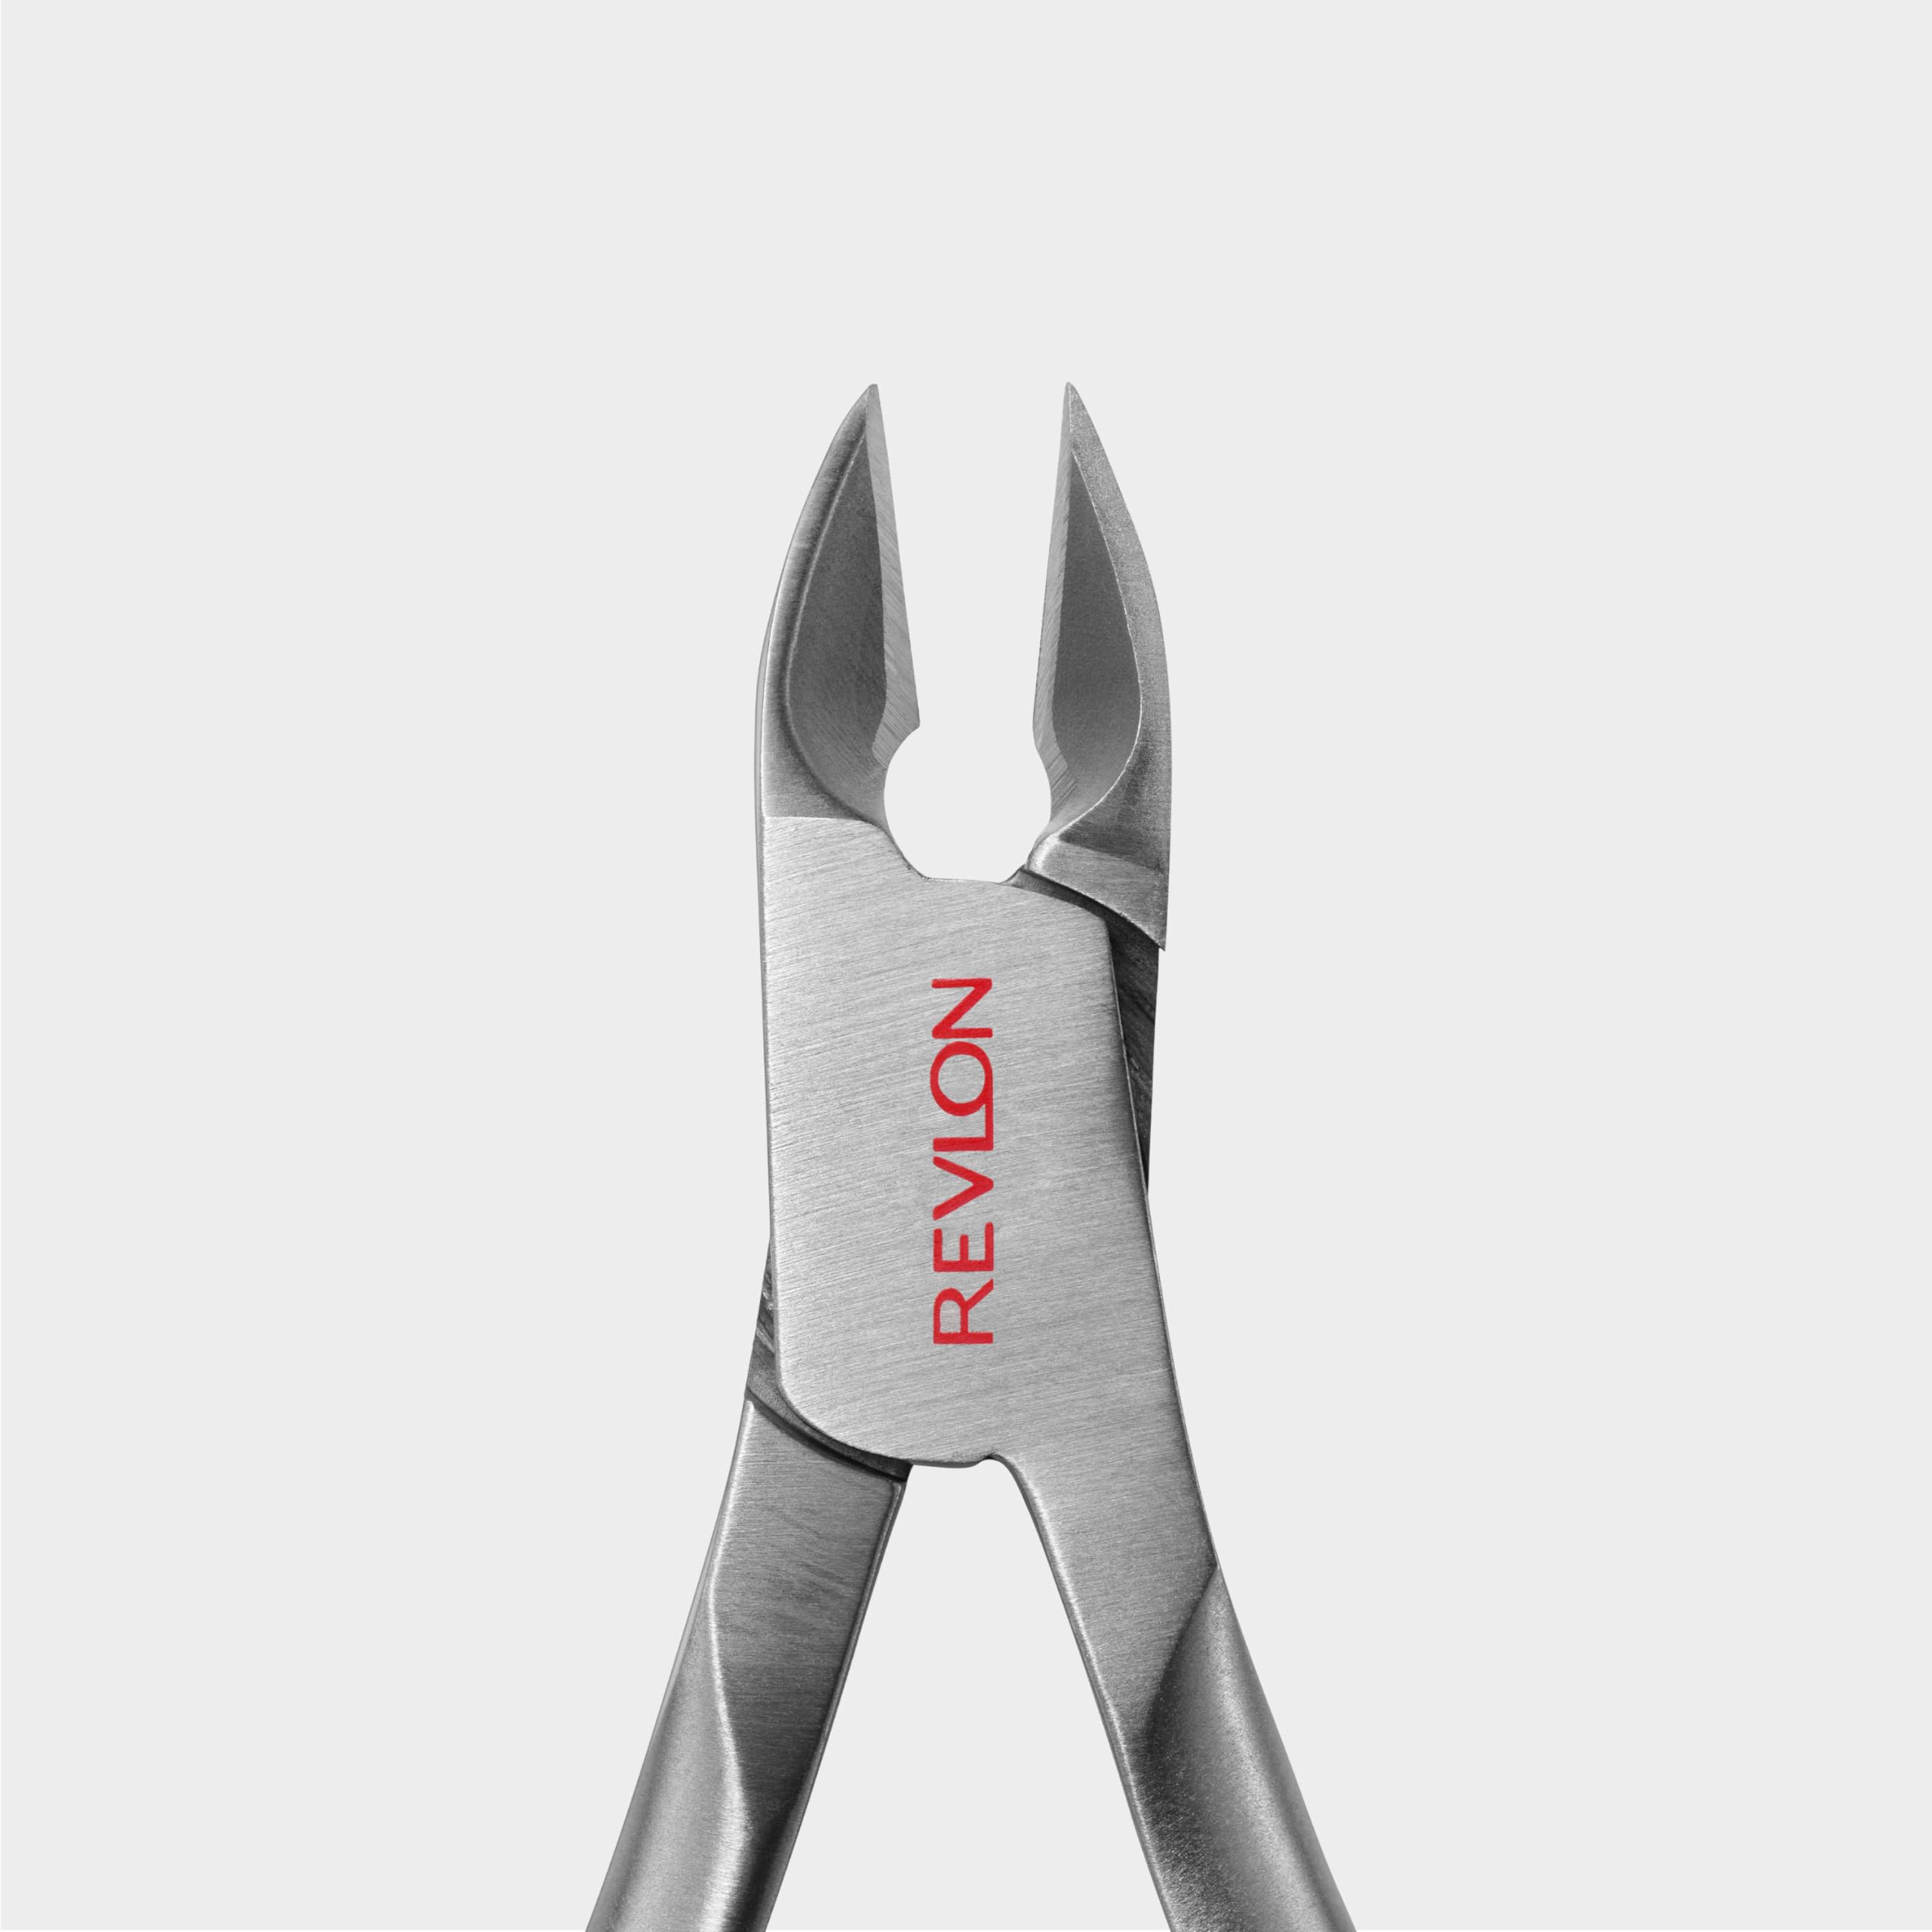 Revlon Full Jaw Cuticle Trimmer, Cuticle Tool, Made with Stainless Steel and High Precision Blade, Easy to Squeeze Spring, 1 Count